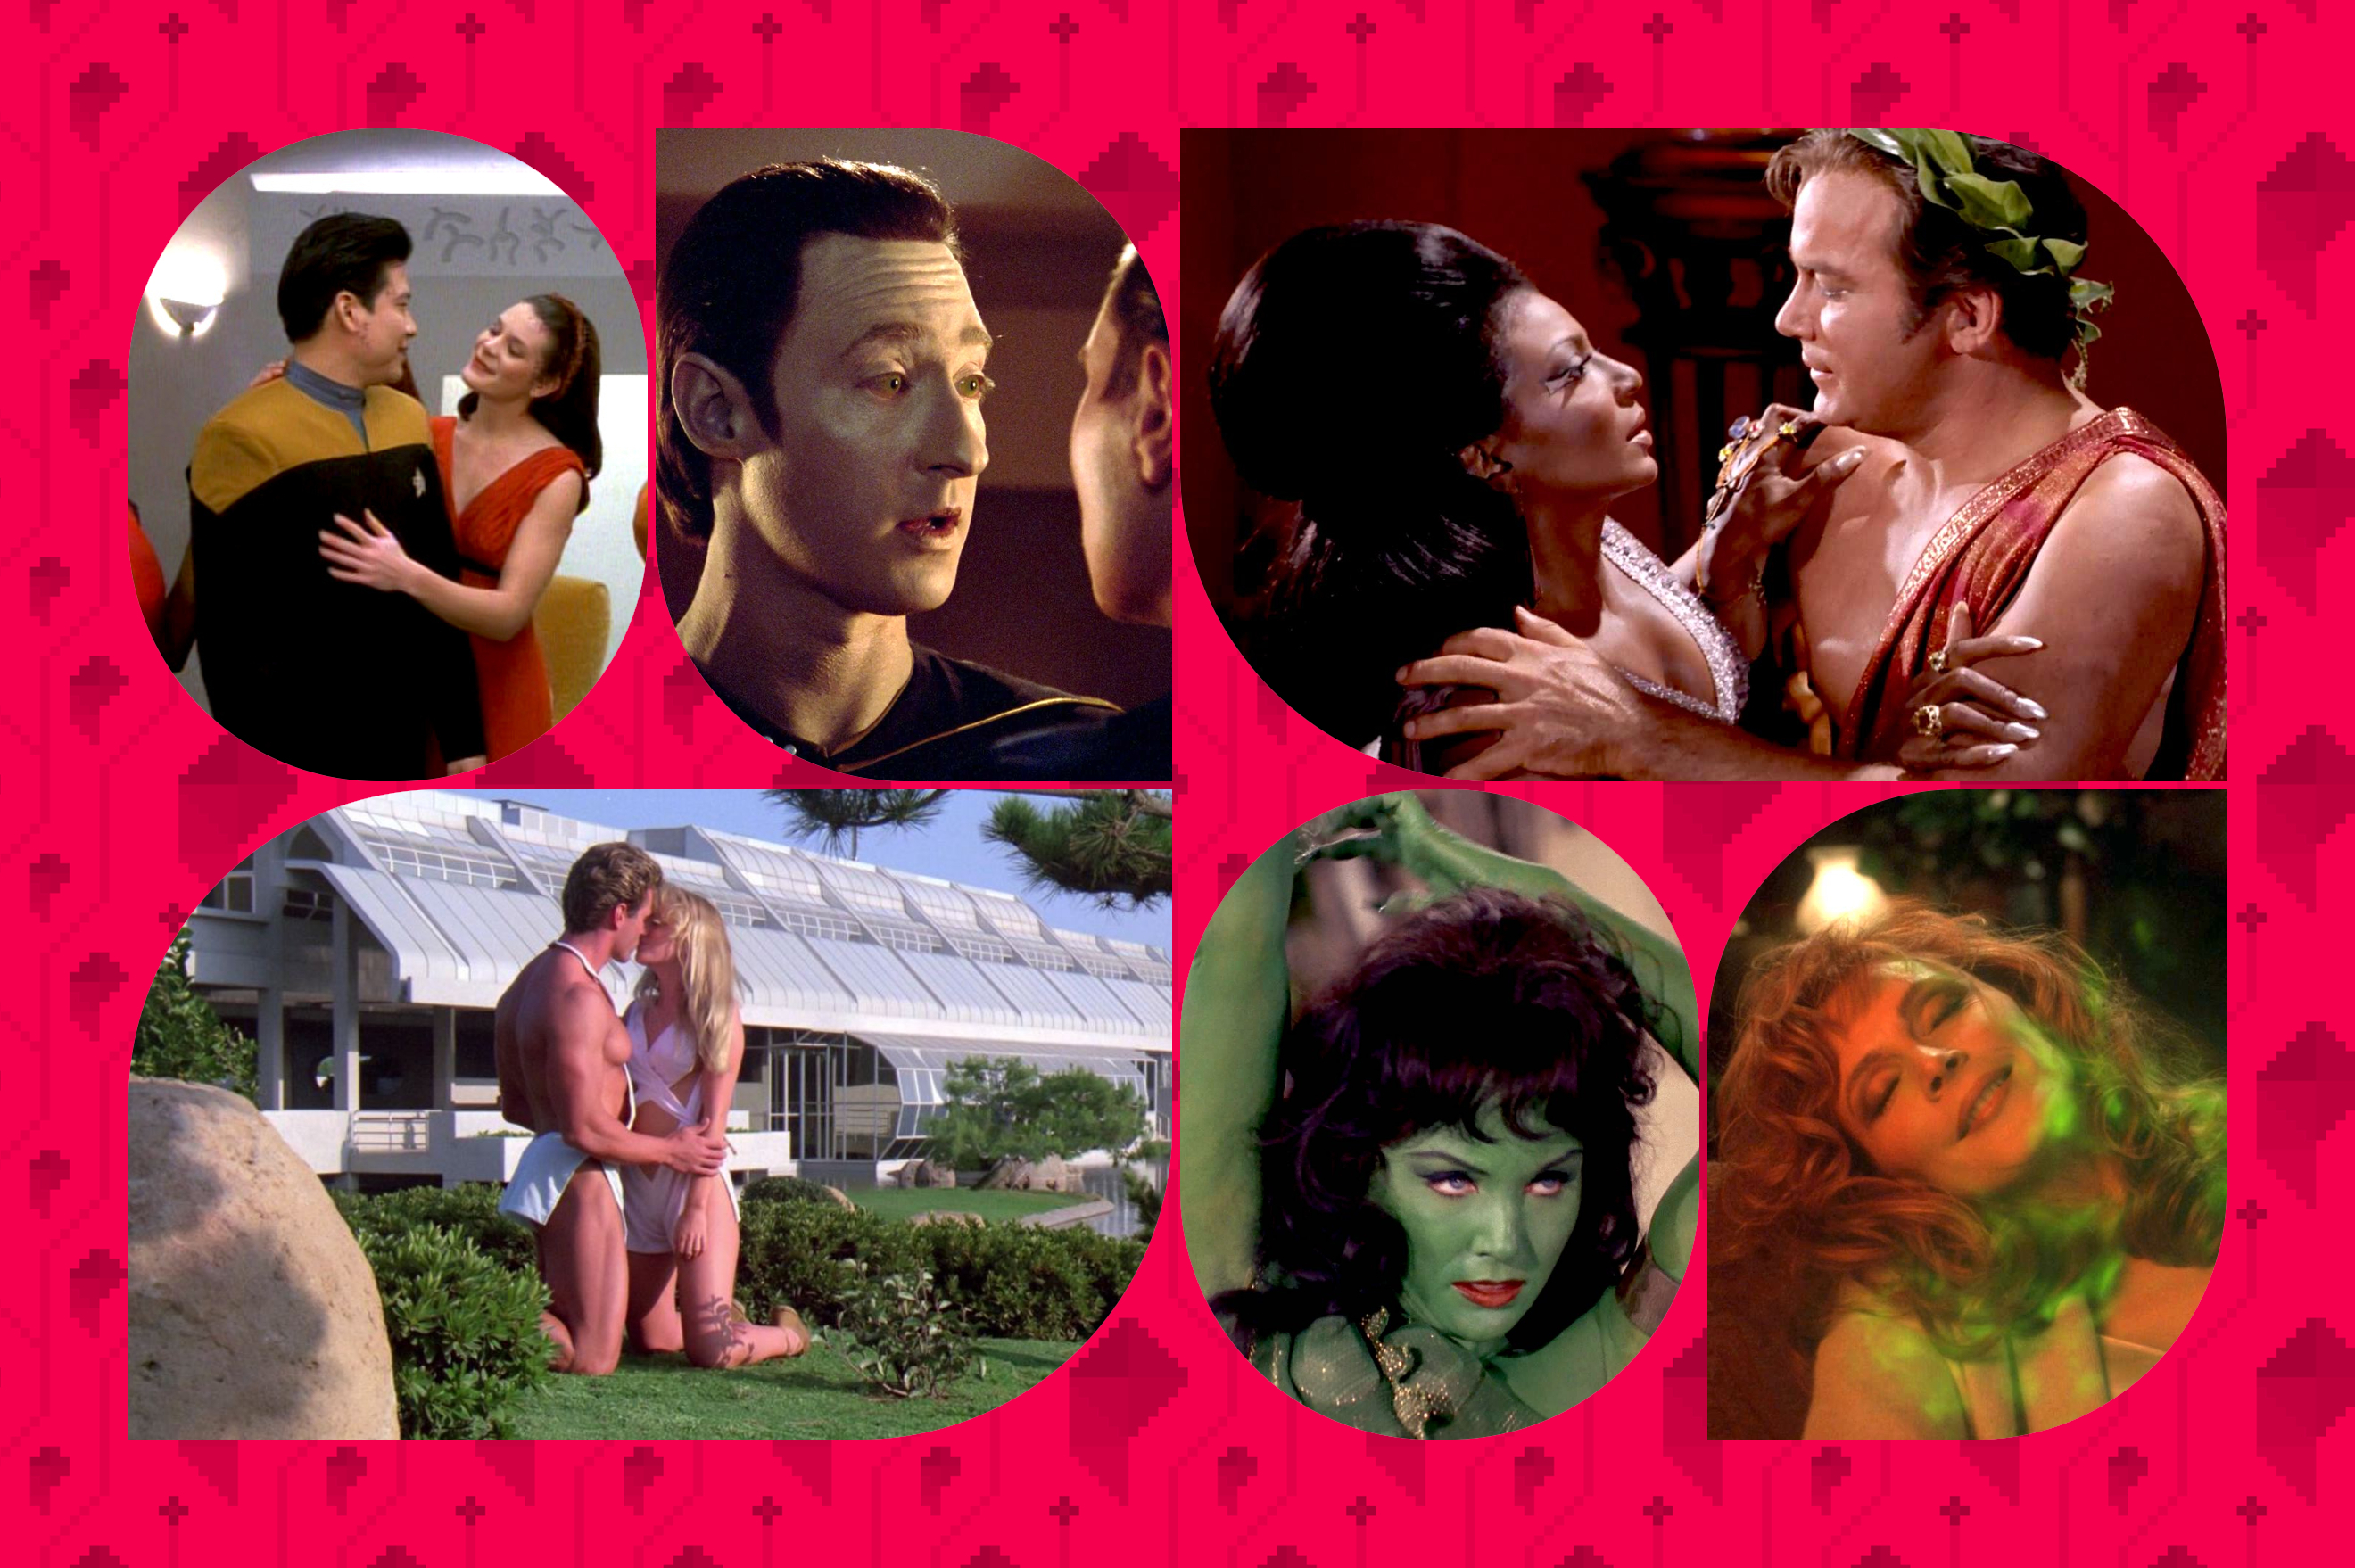 A collage of different screencaps from various Star Trek shows, showing couples embracing and characters in various states of desire. 